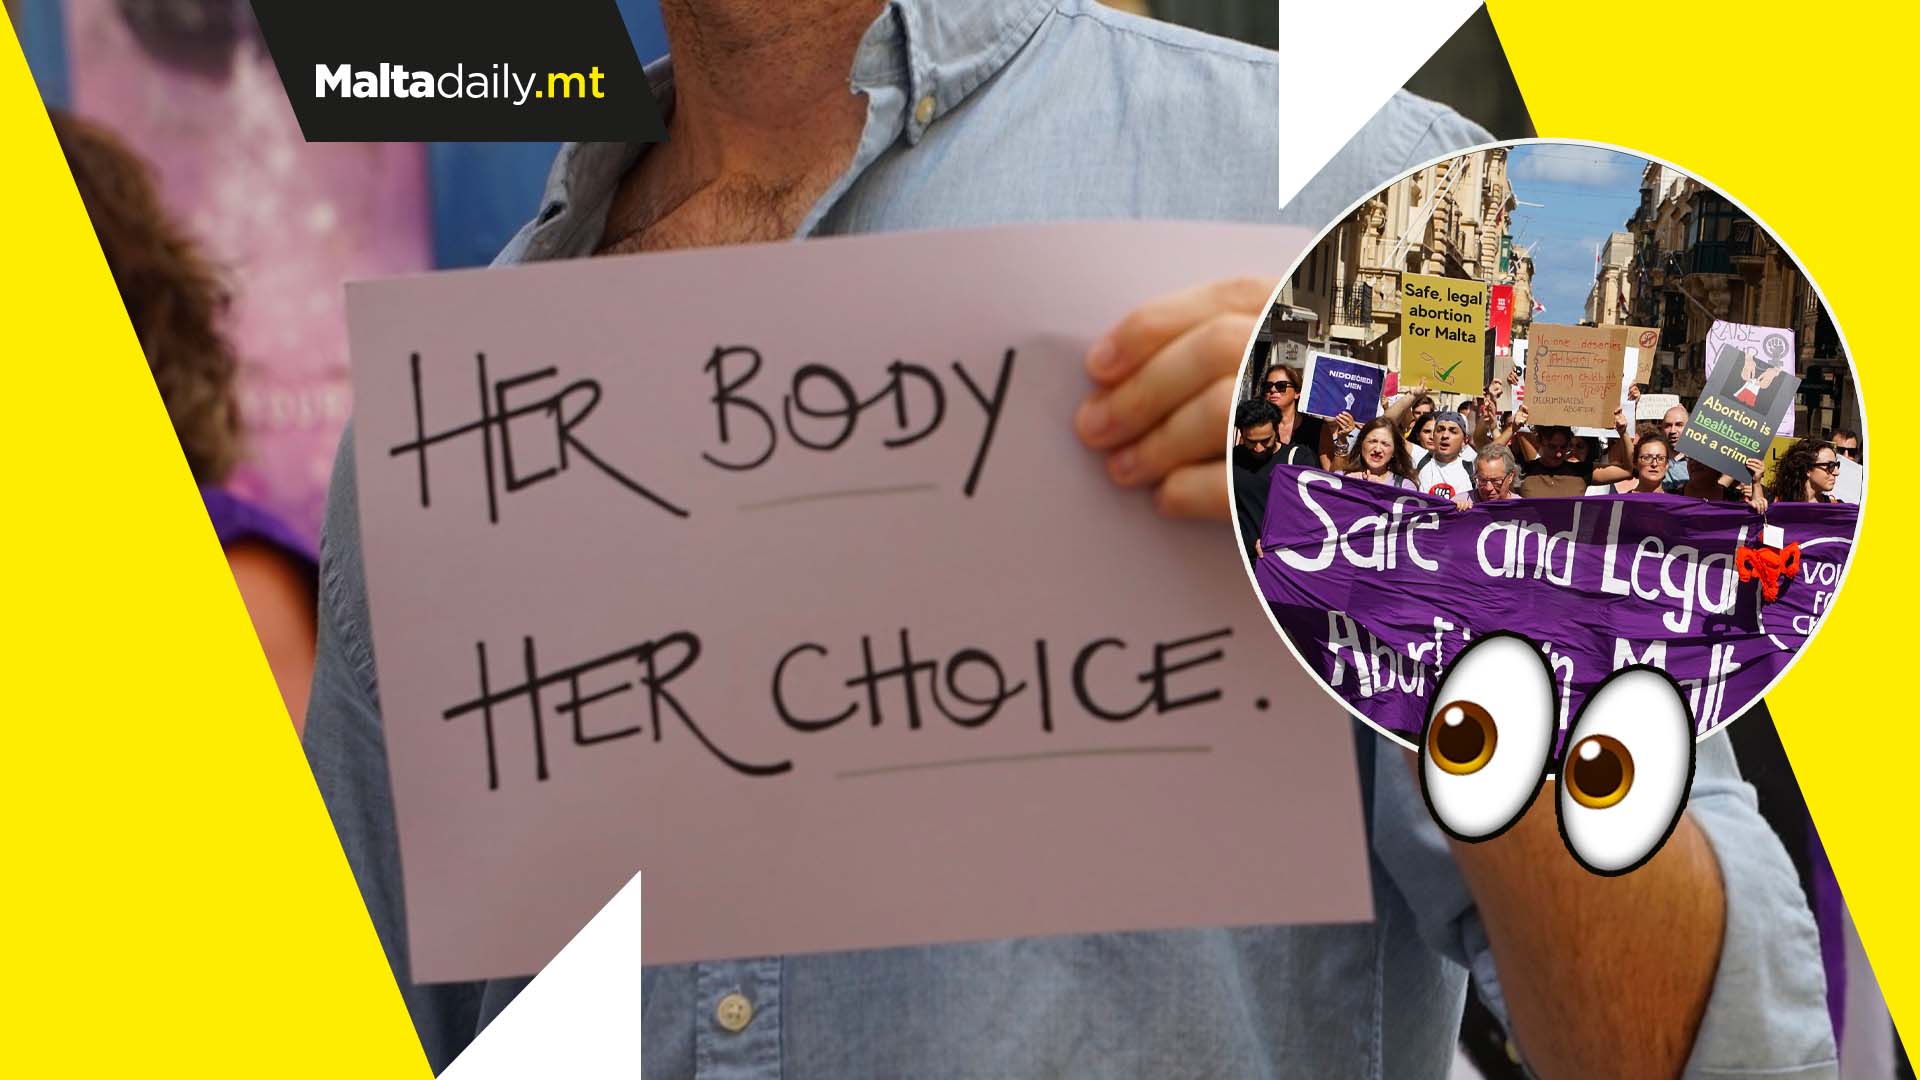 Pro Choice rally sees hundreds march in Valletta streets